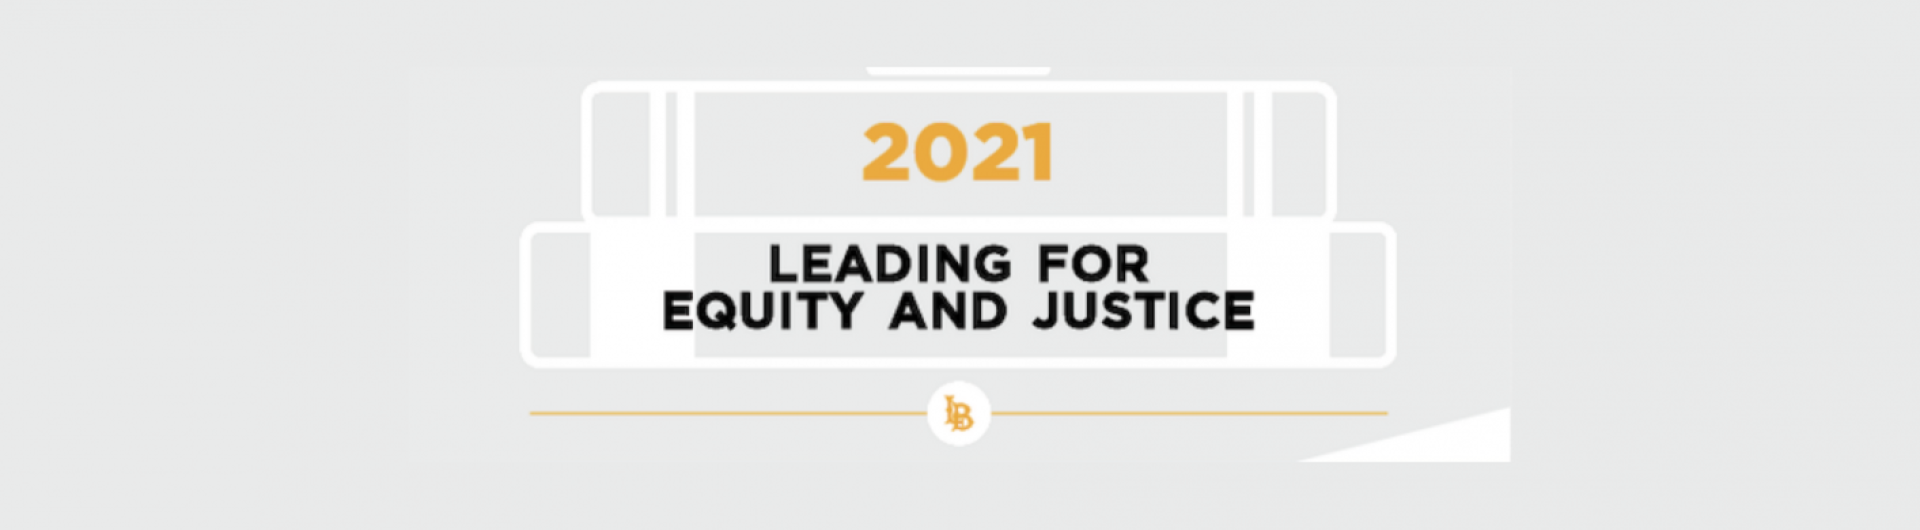 Leading for Equity and Justice